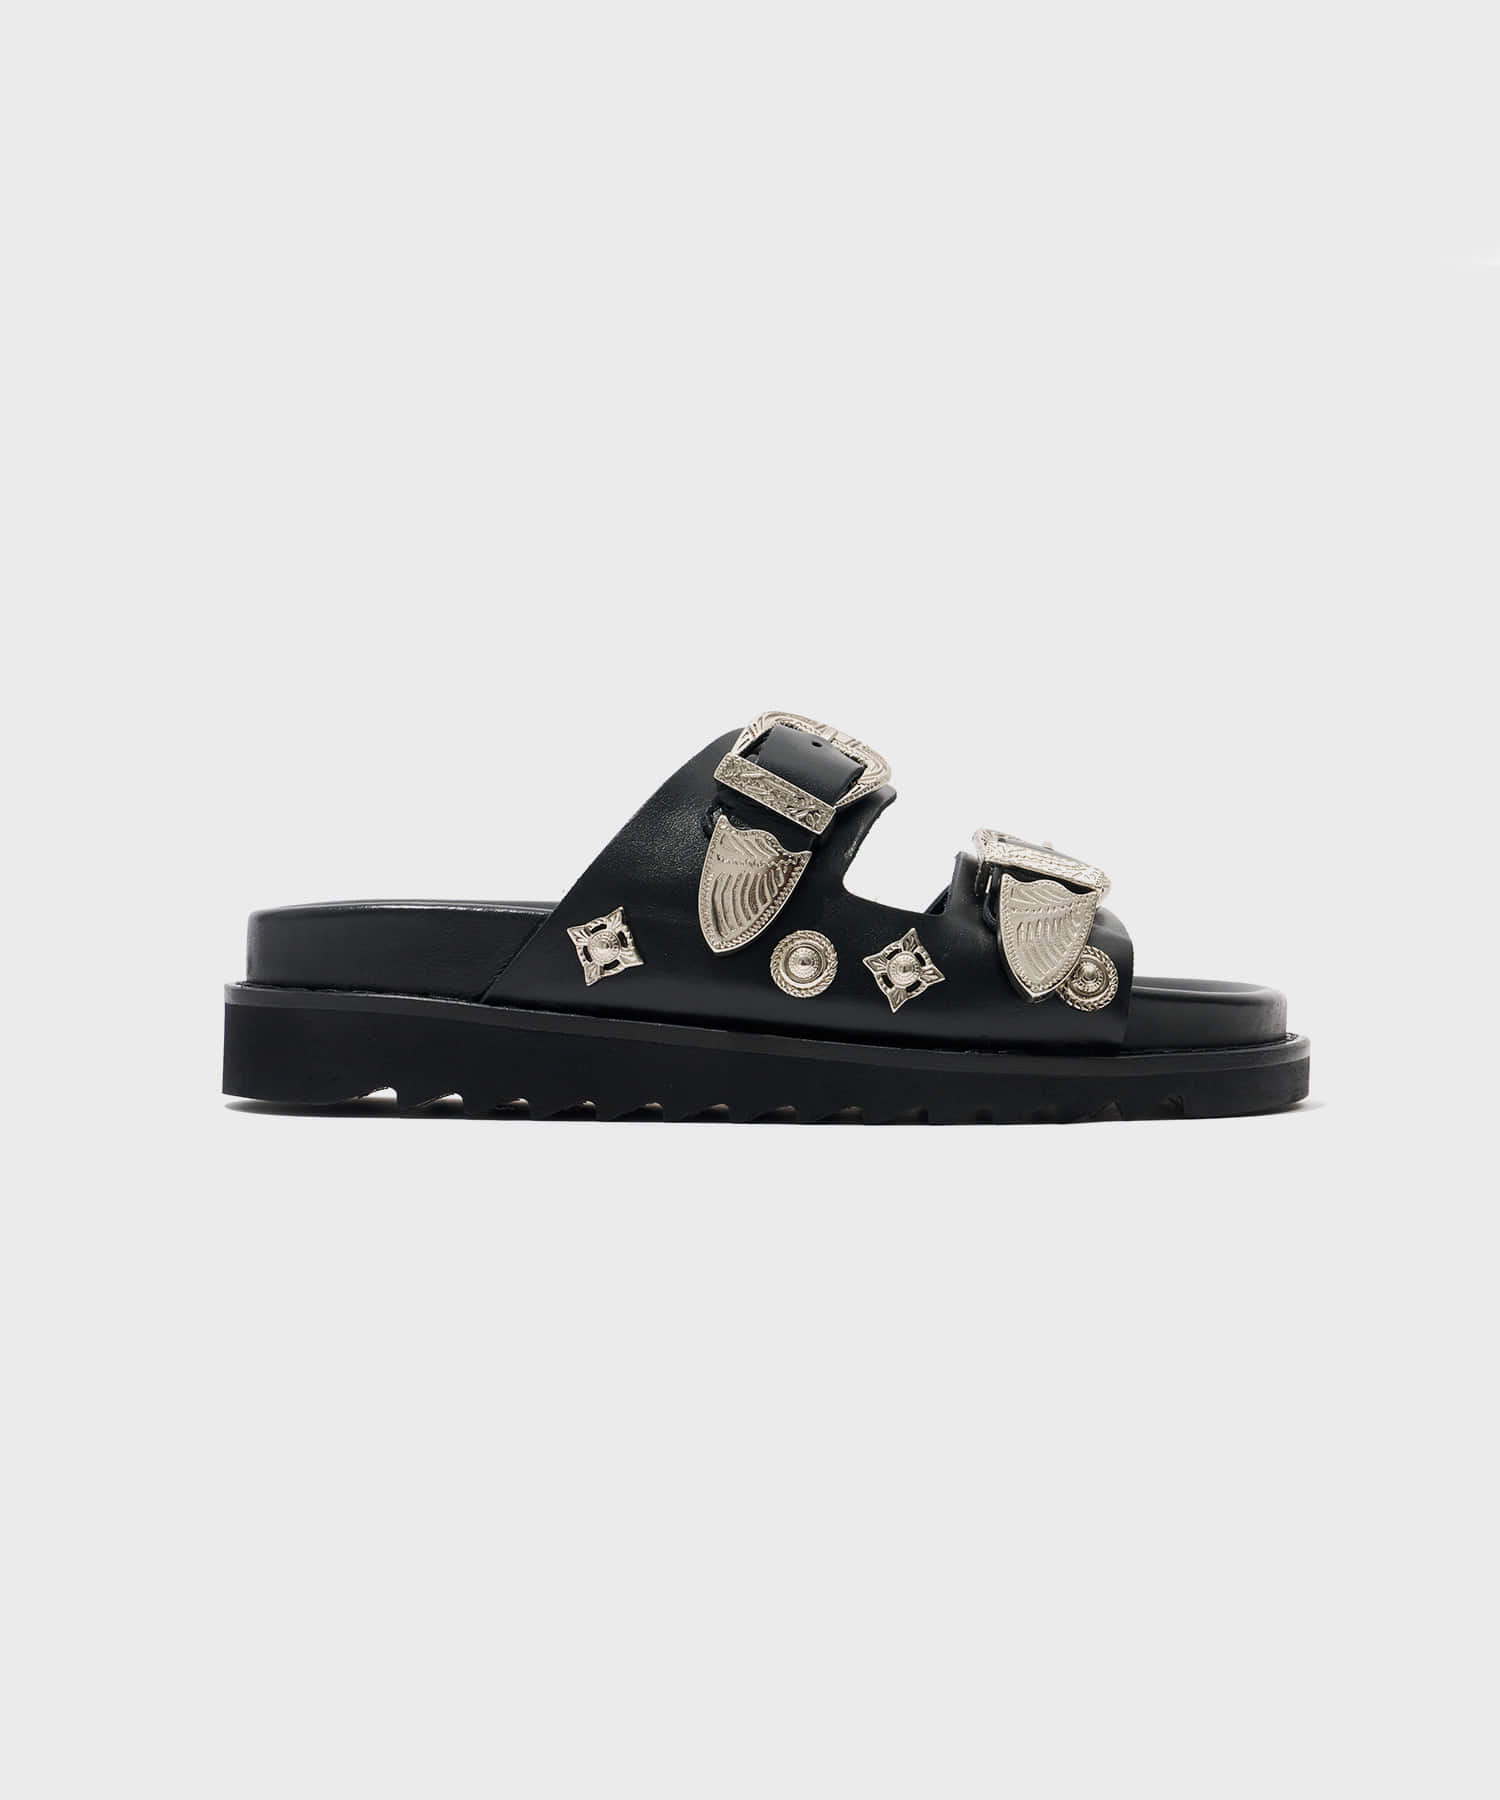 Buckle Sandals (Black Leather)